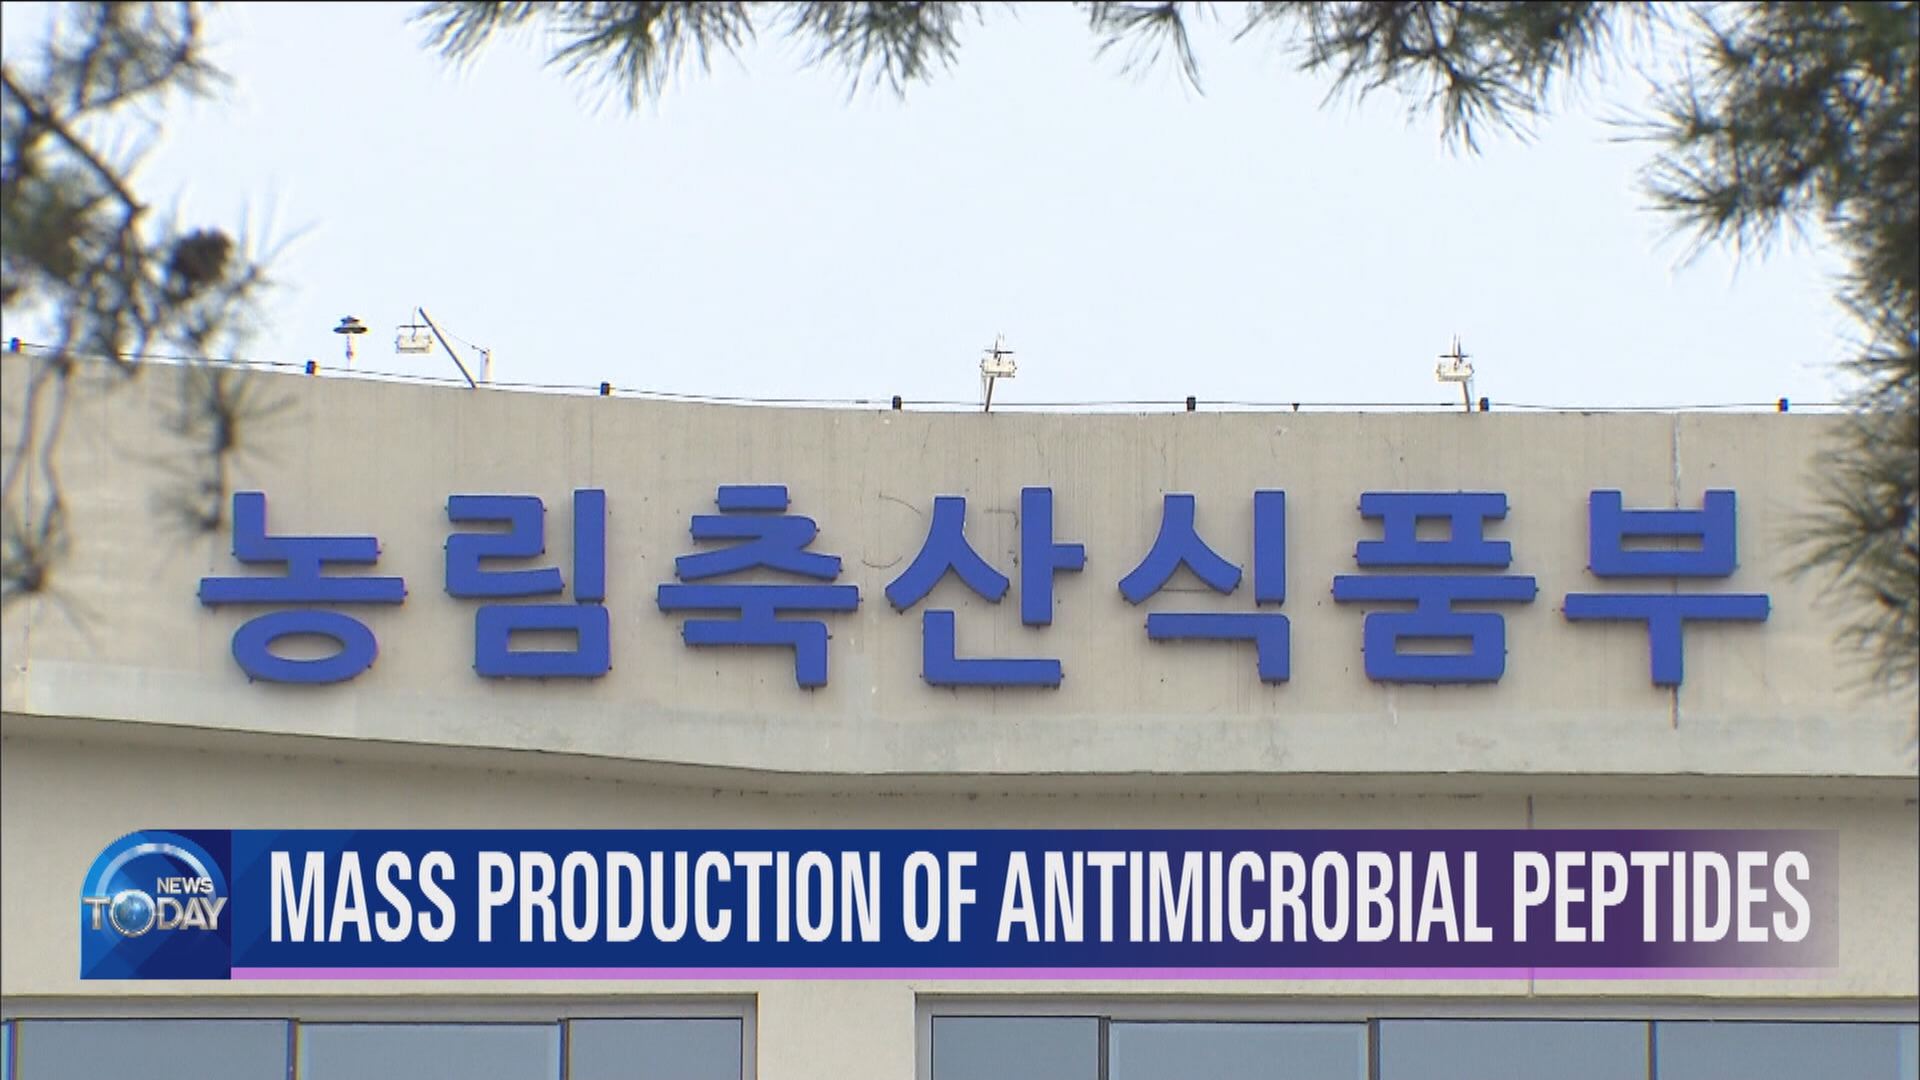 MASS PRODUCTION OF ANTIMICROBIAL PEPTIDES